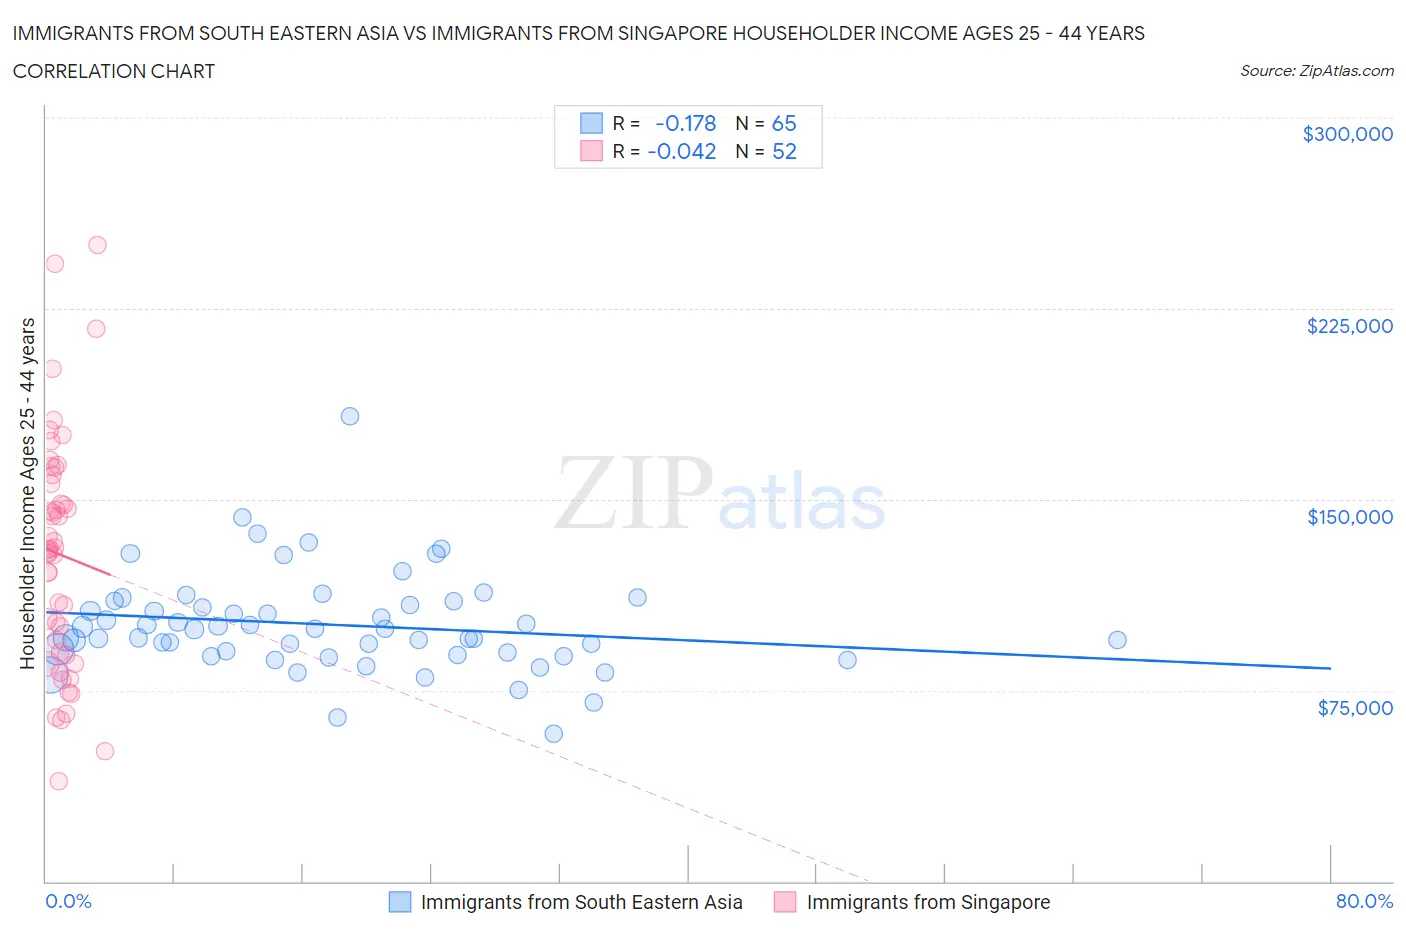 Immigrants from South Eastern Asia vs Immigrants from Singapore Householder Income Ages 25 - 44 years